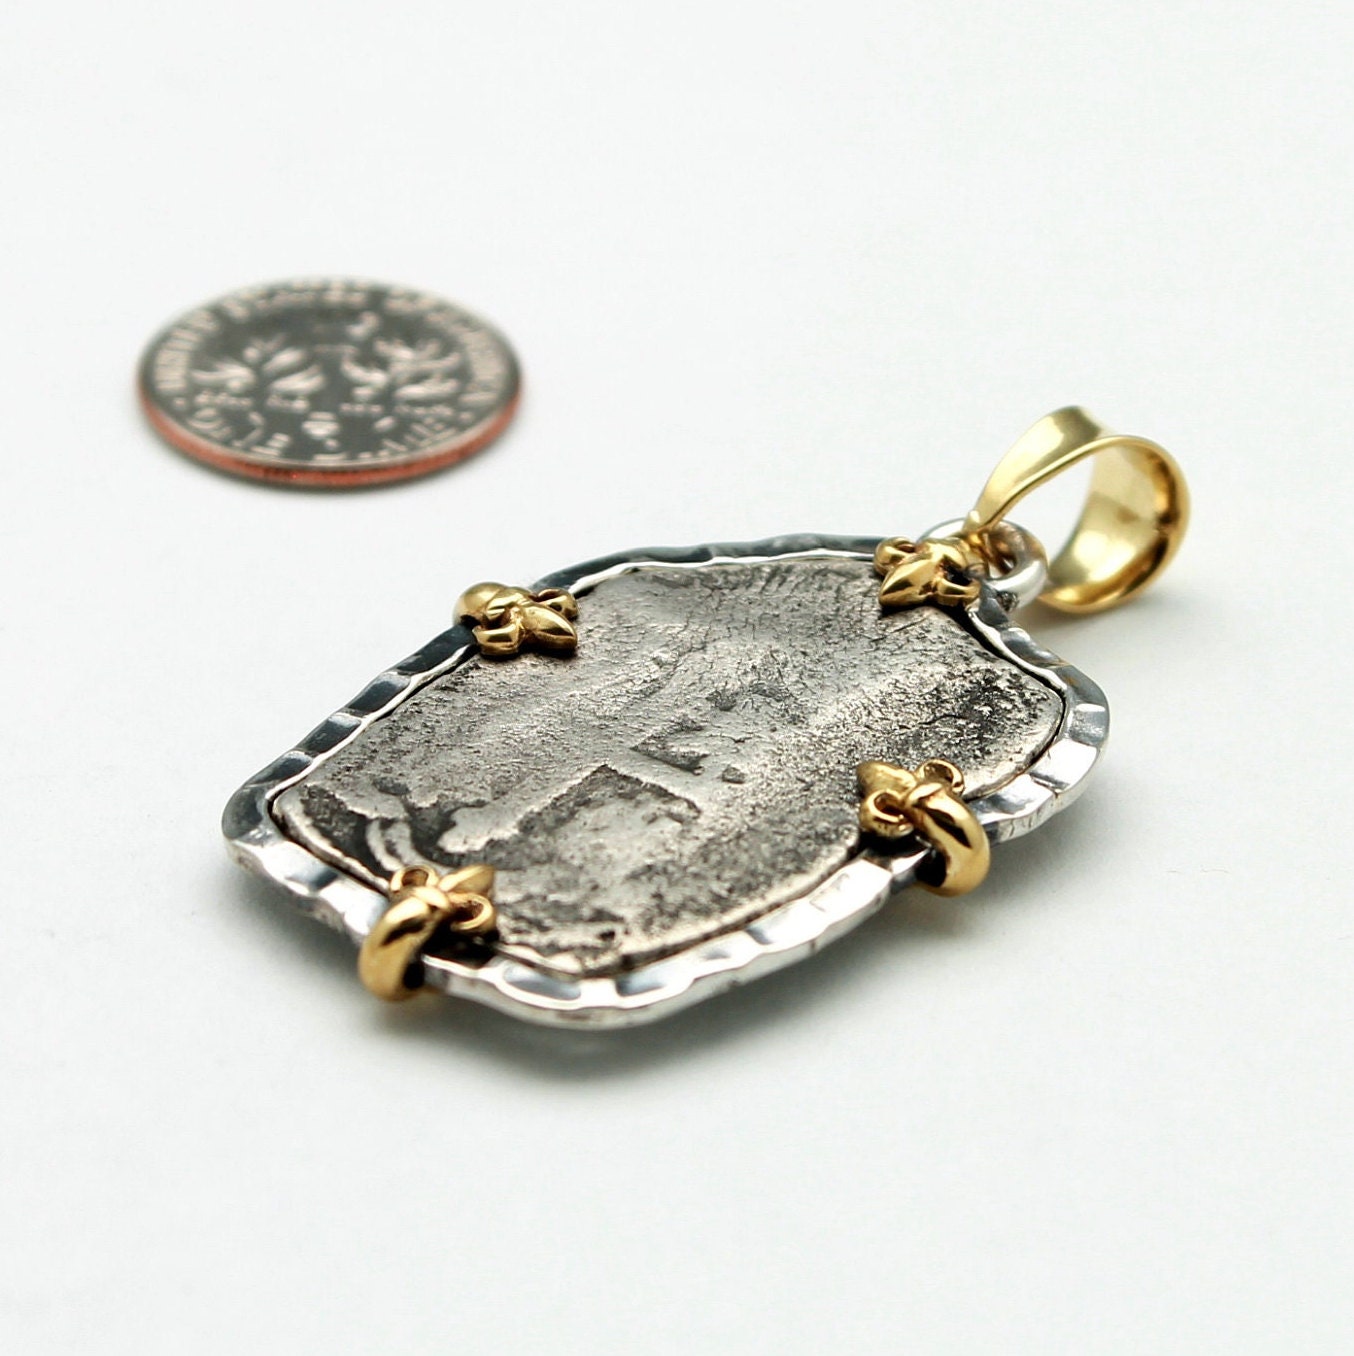 18K Gold Prongs, Sterling Silver Pendant, 1715 Fleet, Spanish Shipwreck Coin, ID13971